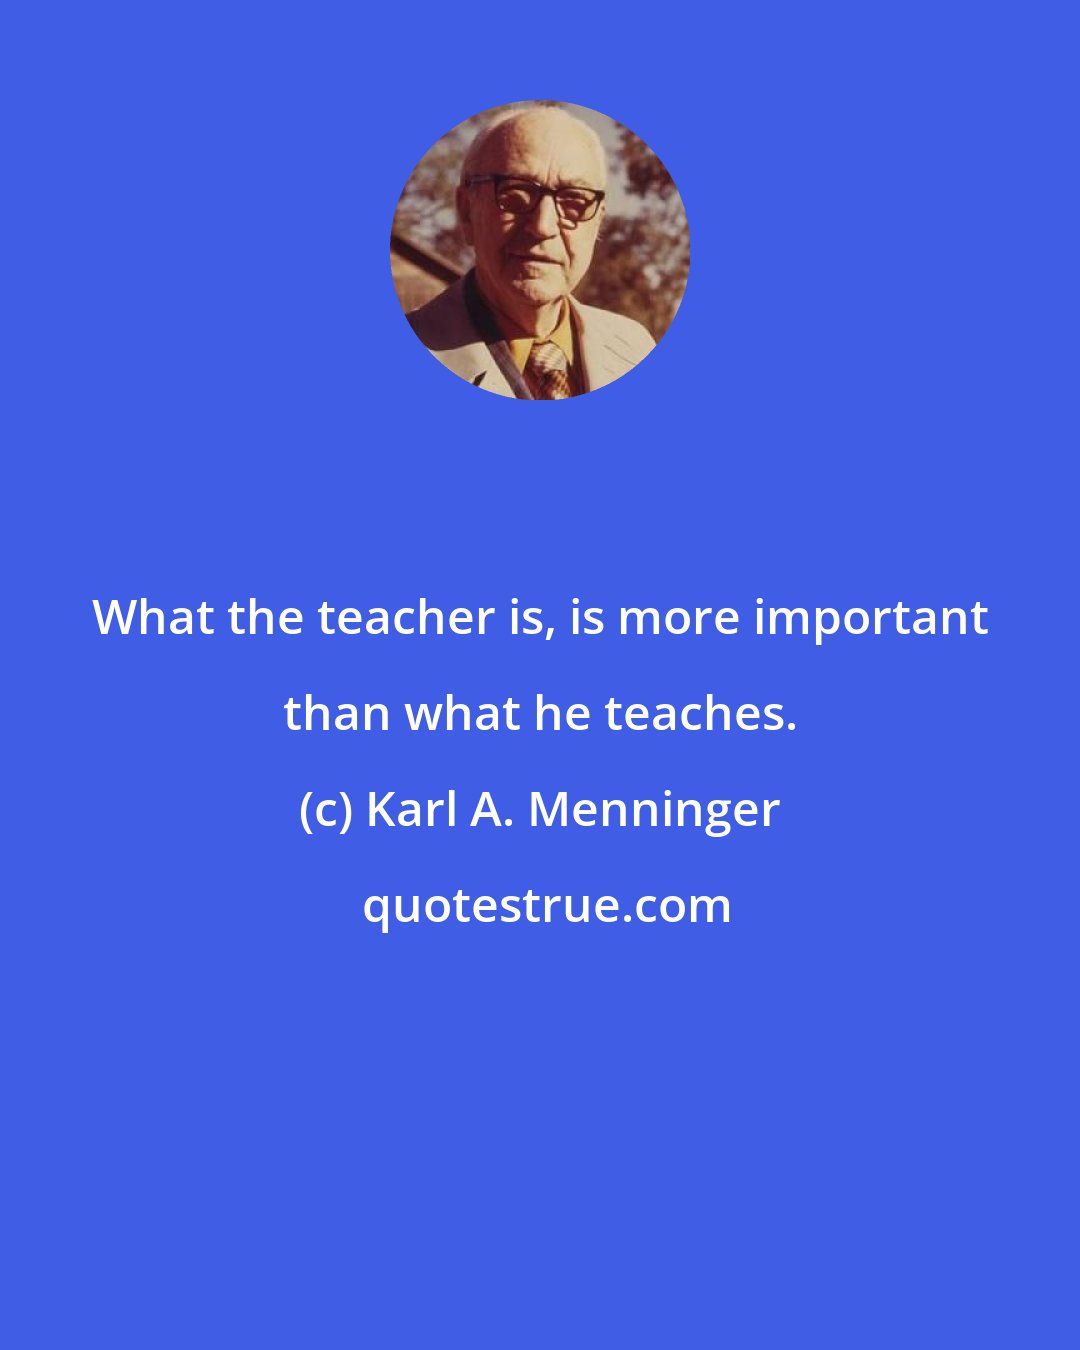 Karl A. Menninger: What the teacher is, is more important than what he teaches.